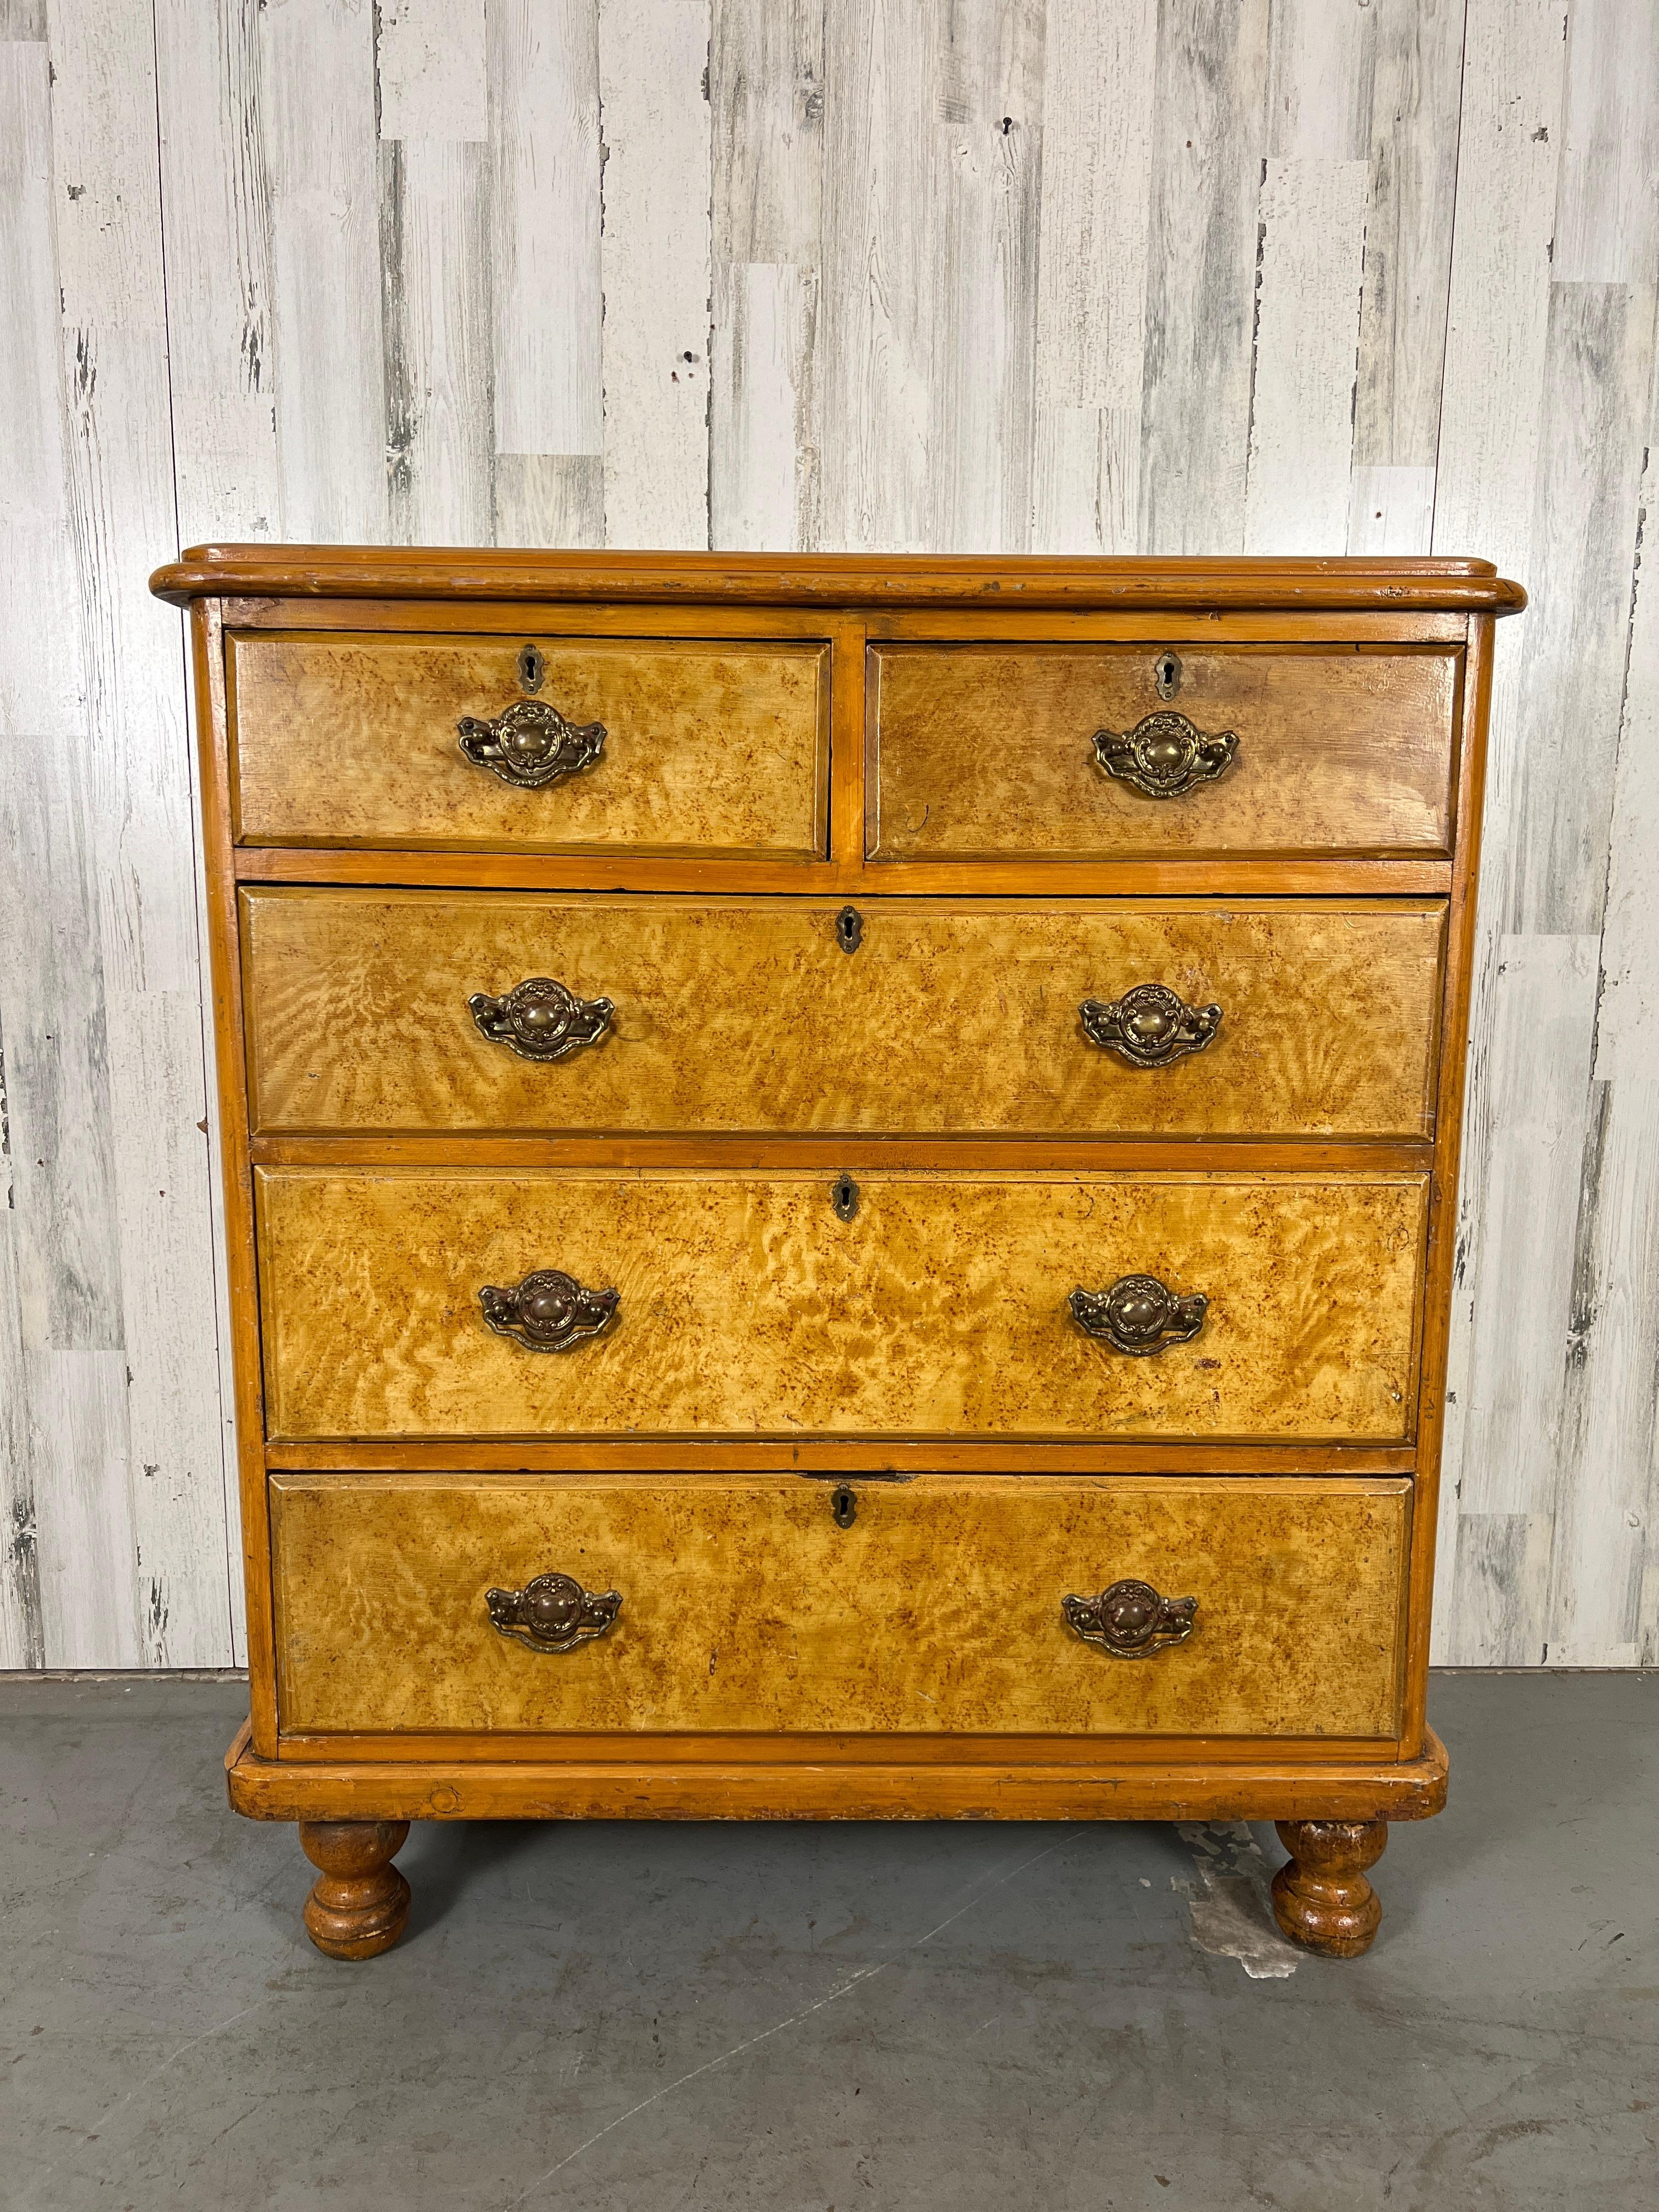 Solid pine with hand painted faux grain design and faux burl on the drawer fronts. Rococo Revival drawer pulls add to this timeless style.